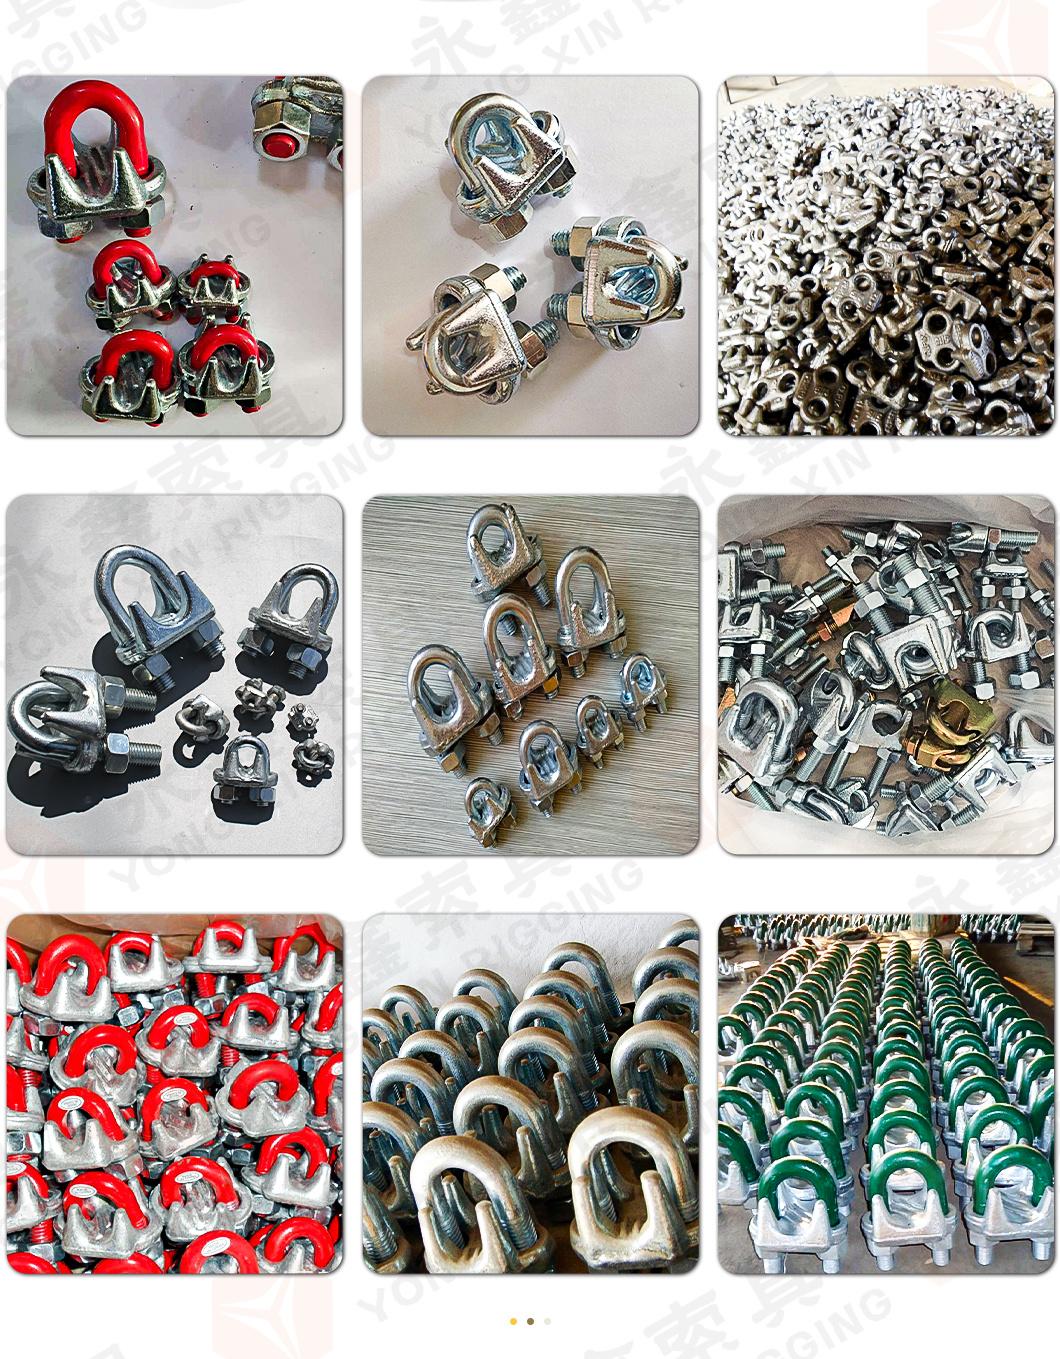 U. S. Type Drop Forged Galvanized Wire Rope Fitting Wire Rope Clip